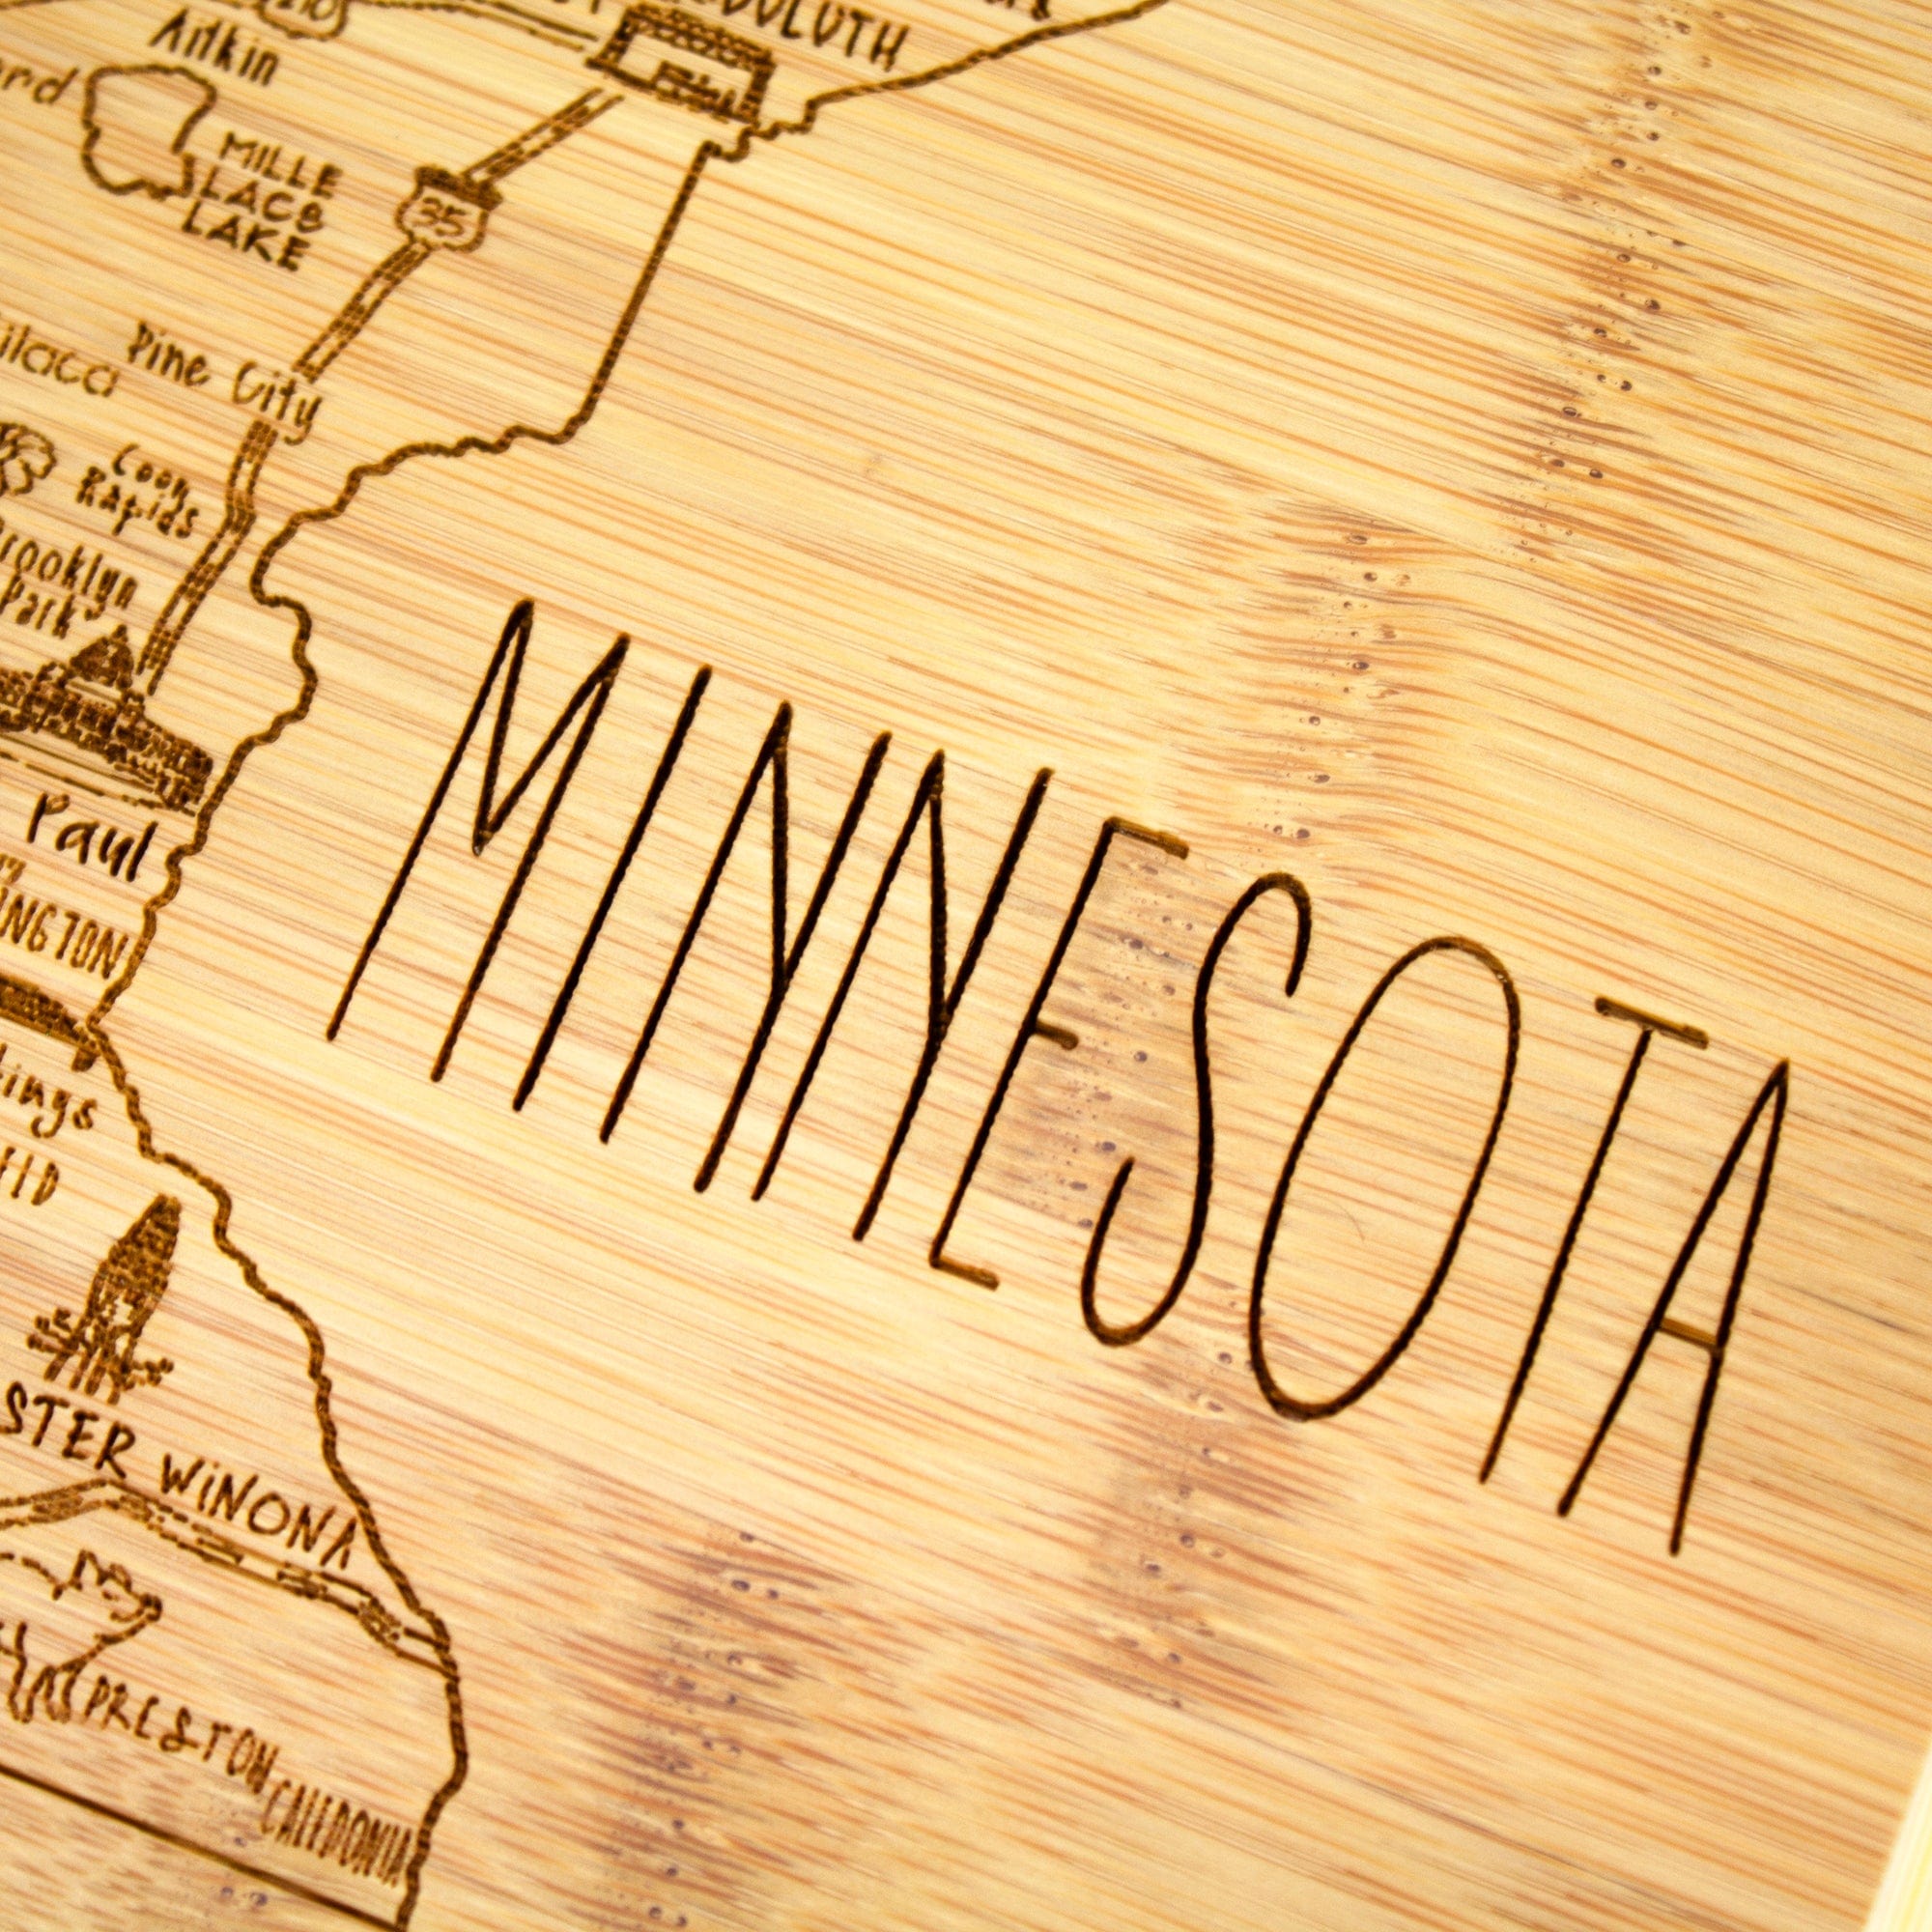 Totally Bamboo A Slice of Life Minnesota Serving and Cutting Board, 11" x 8-3/4"